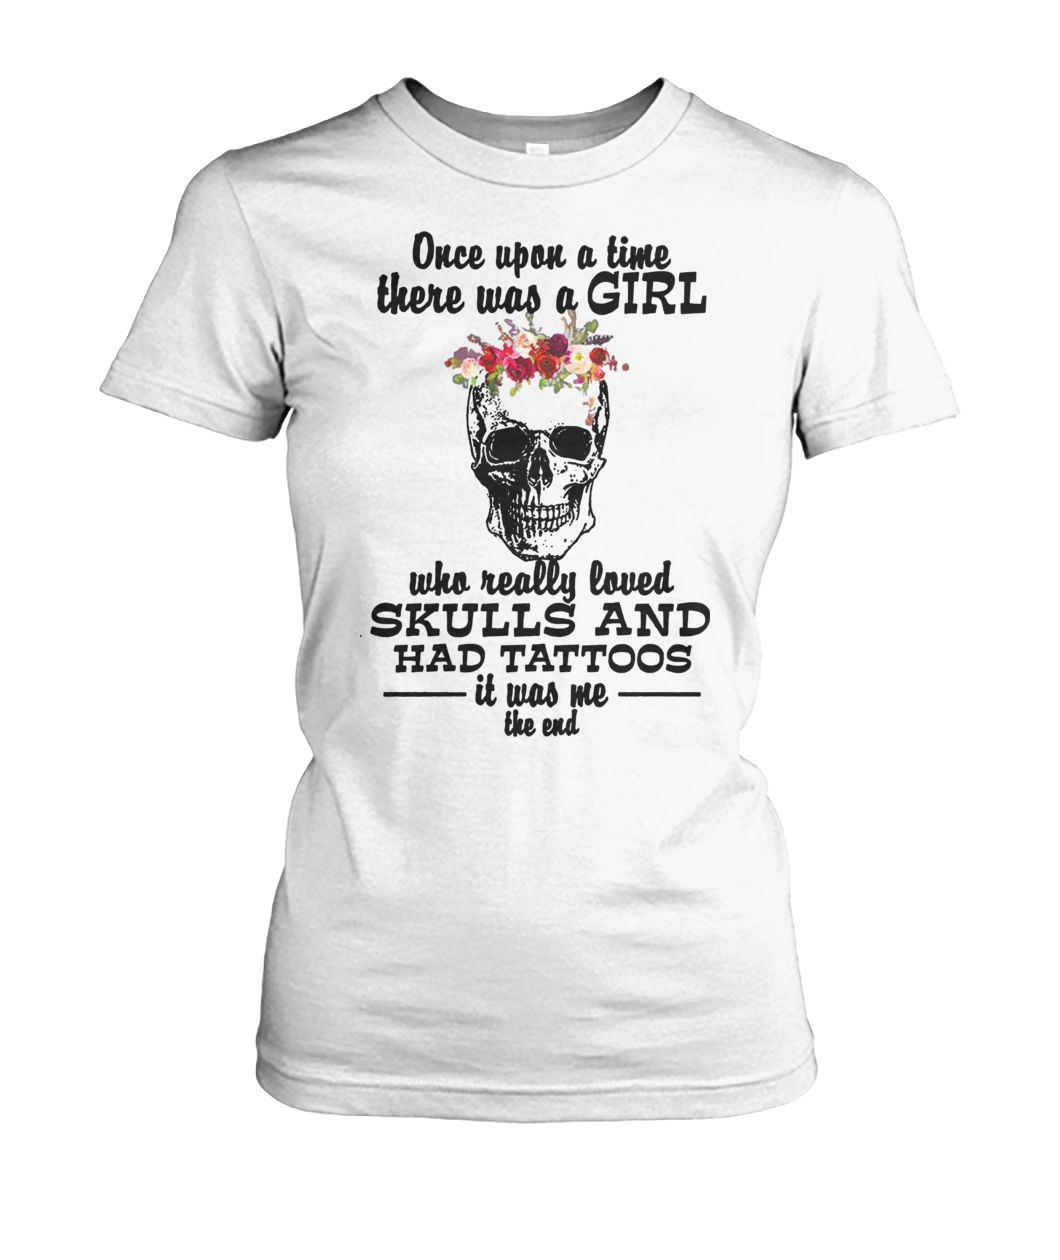 Once upon a time there was a girl who really loved skulls and had tattoos women's crew tee